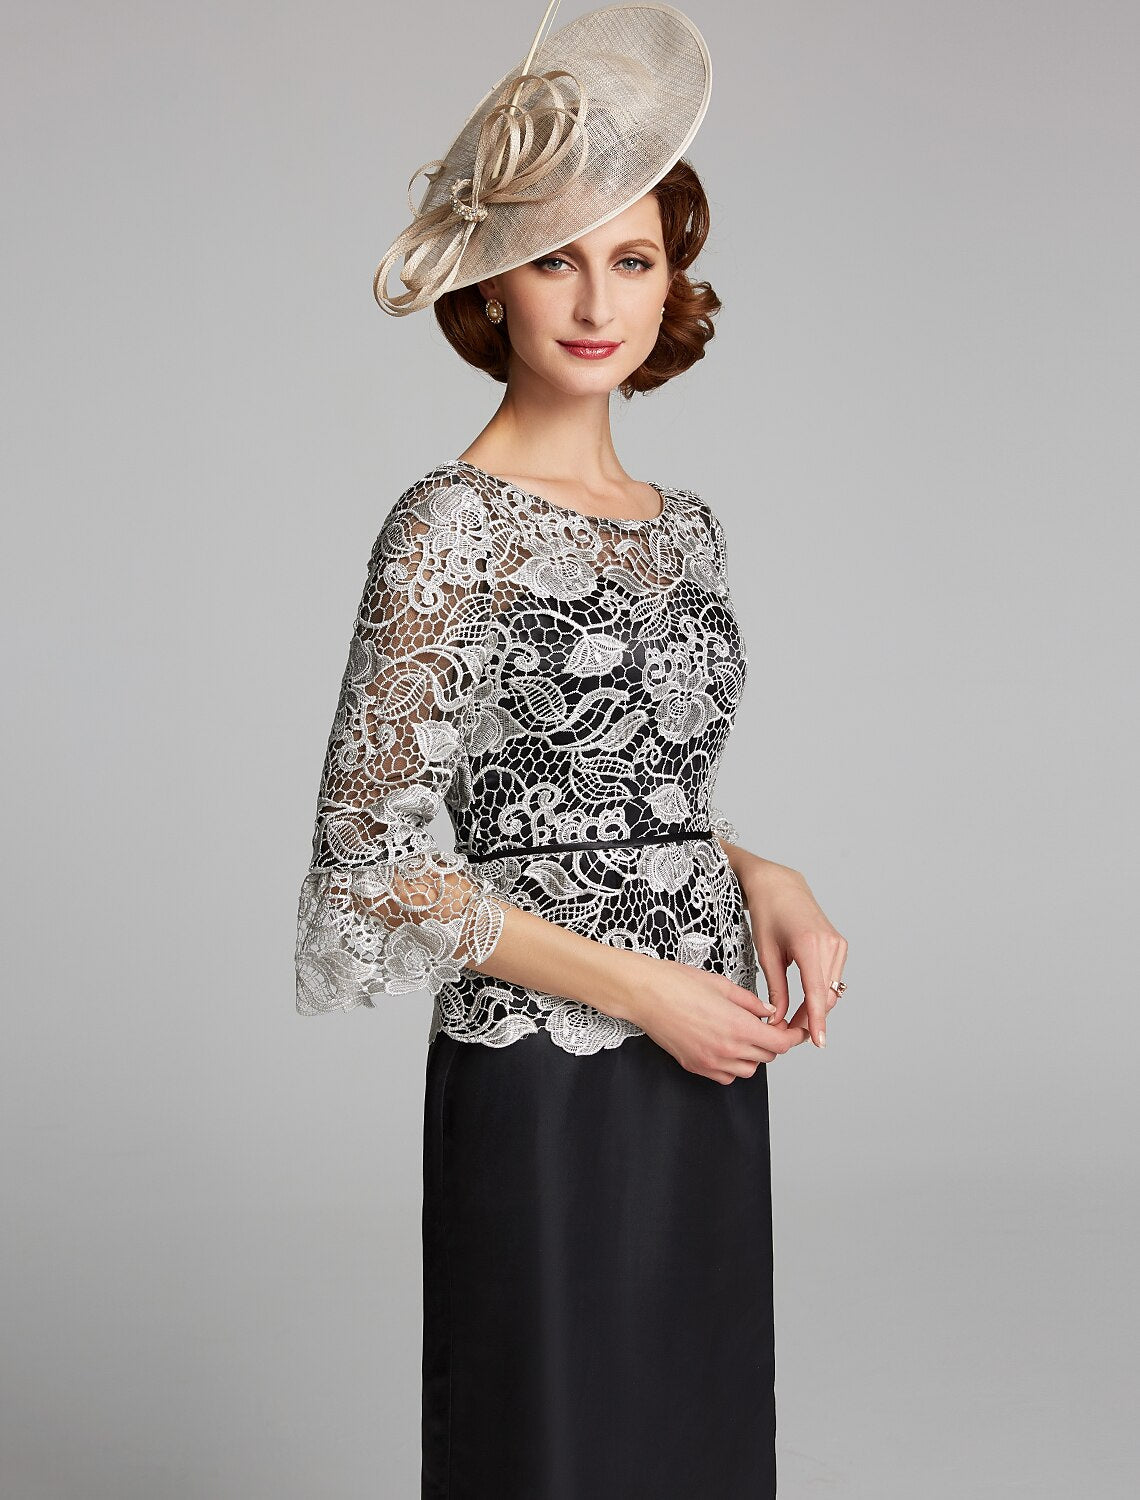 Sheath / Column Mother of the Bride Dress Jewel Neck Floor Length Satin Lace 3/4 Length Sleeve with Lace